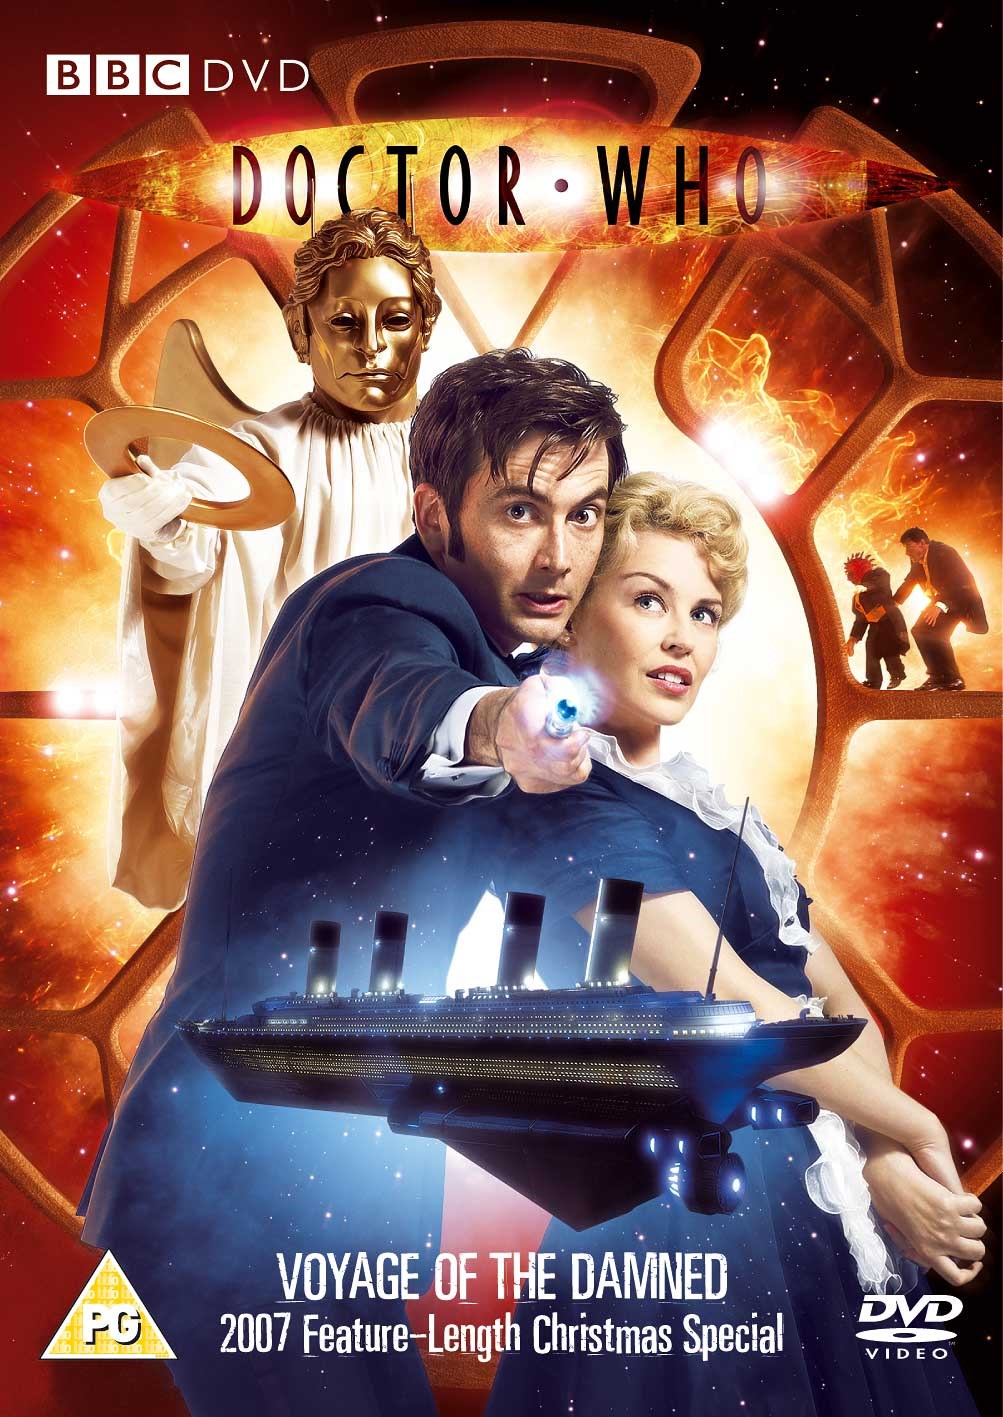 Doctor who christmas special download torrent